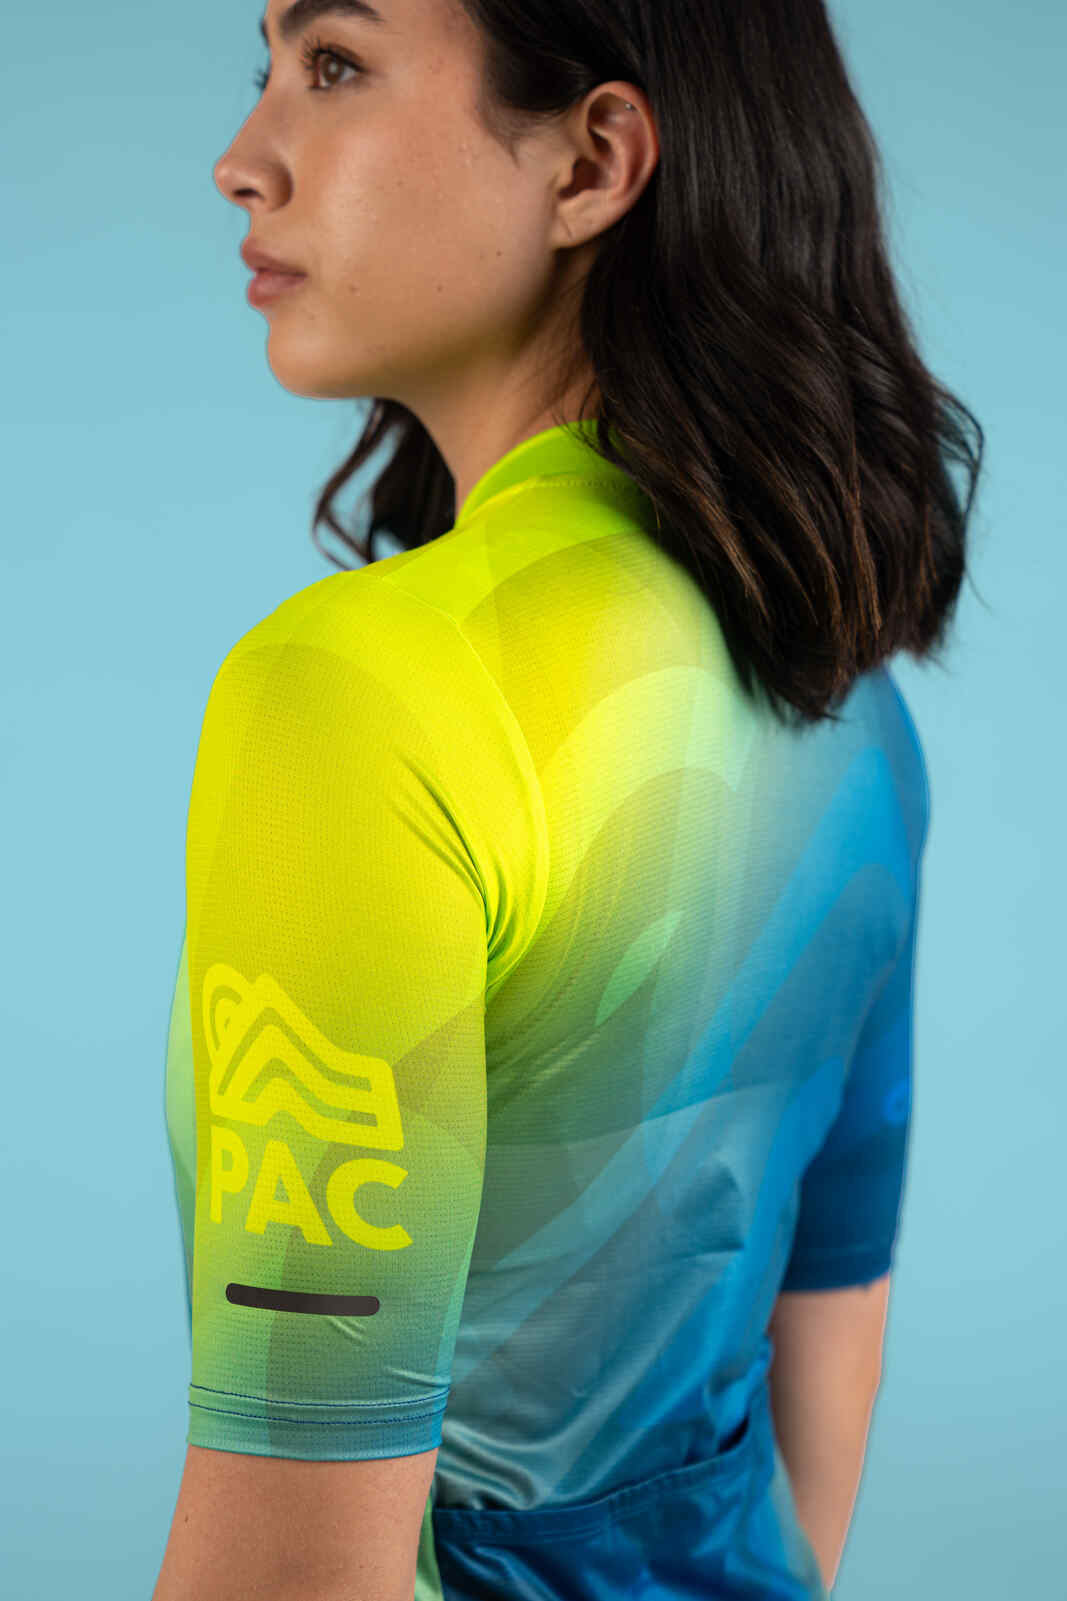 Women's PAC Ascent Aero Cycling Jersey - Cool Fade Sleeve Detail